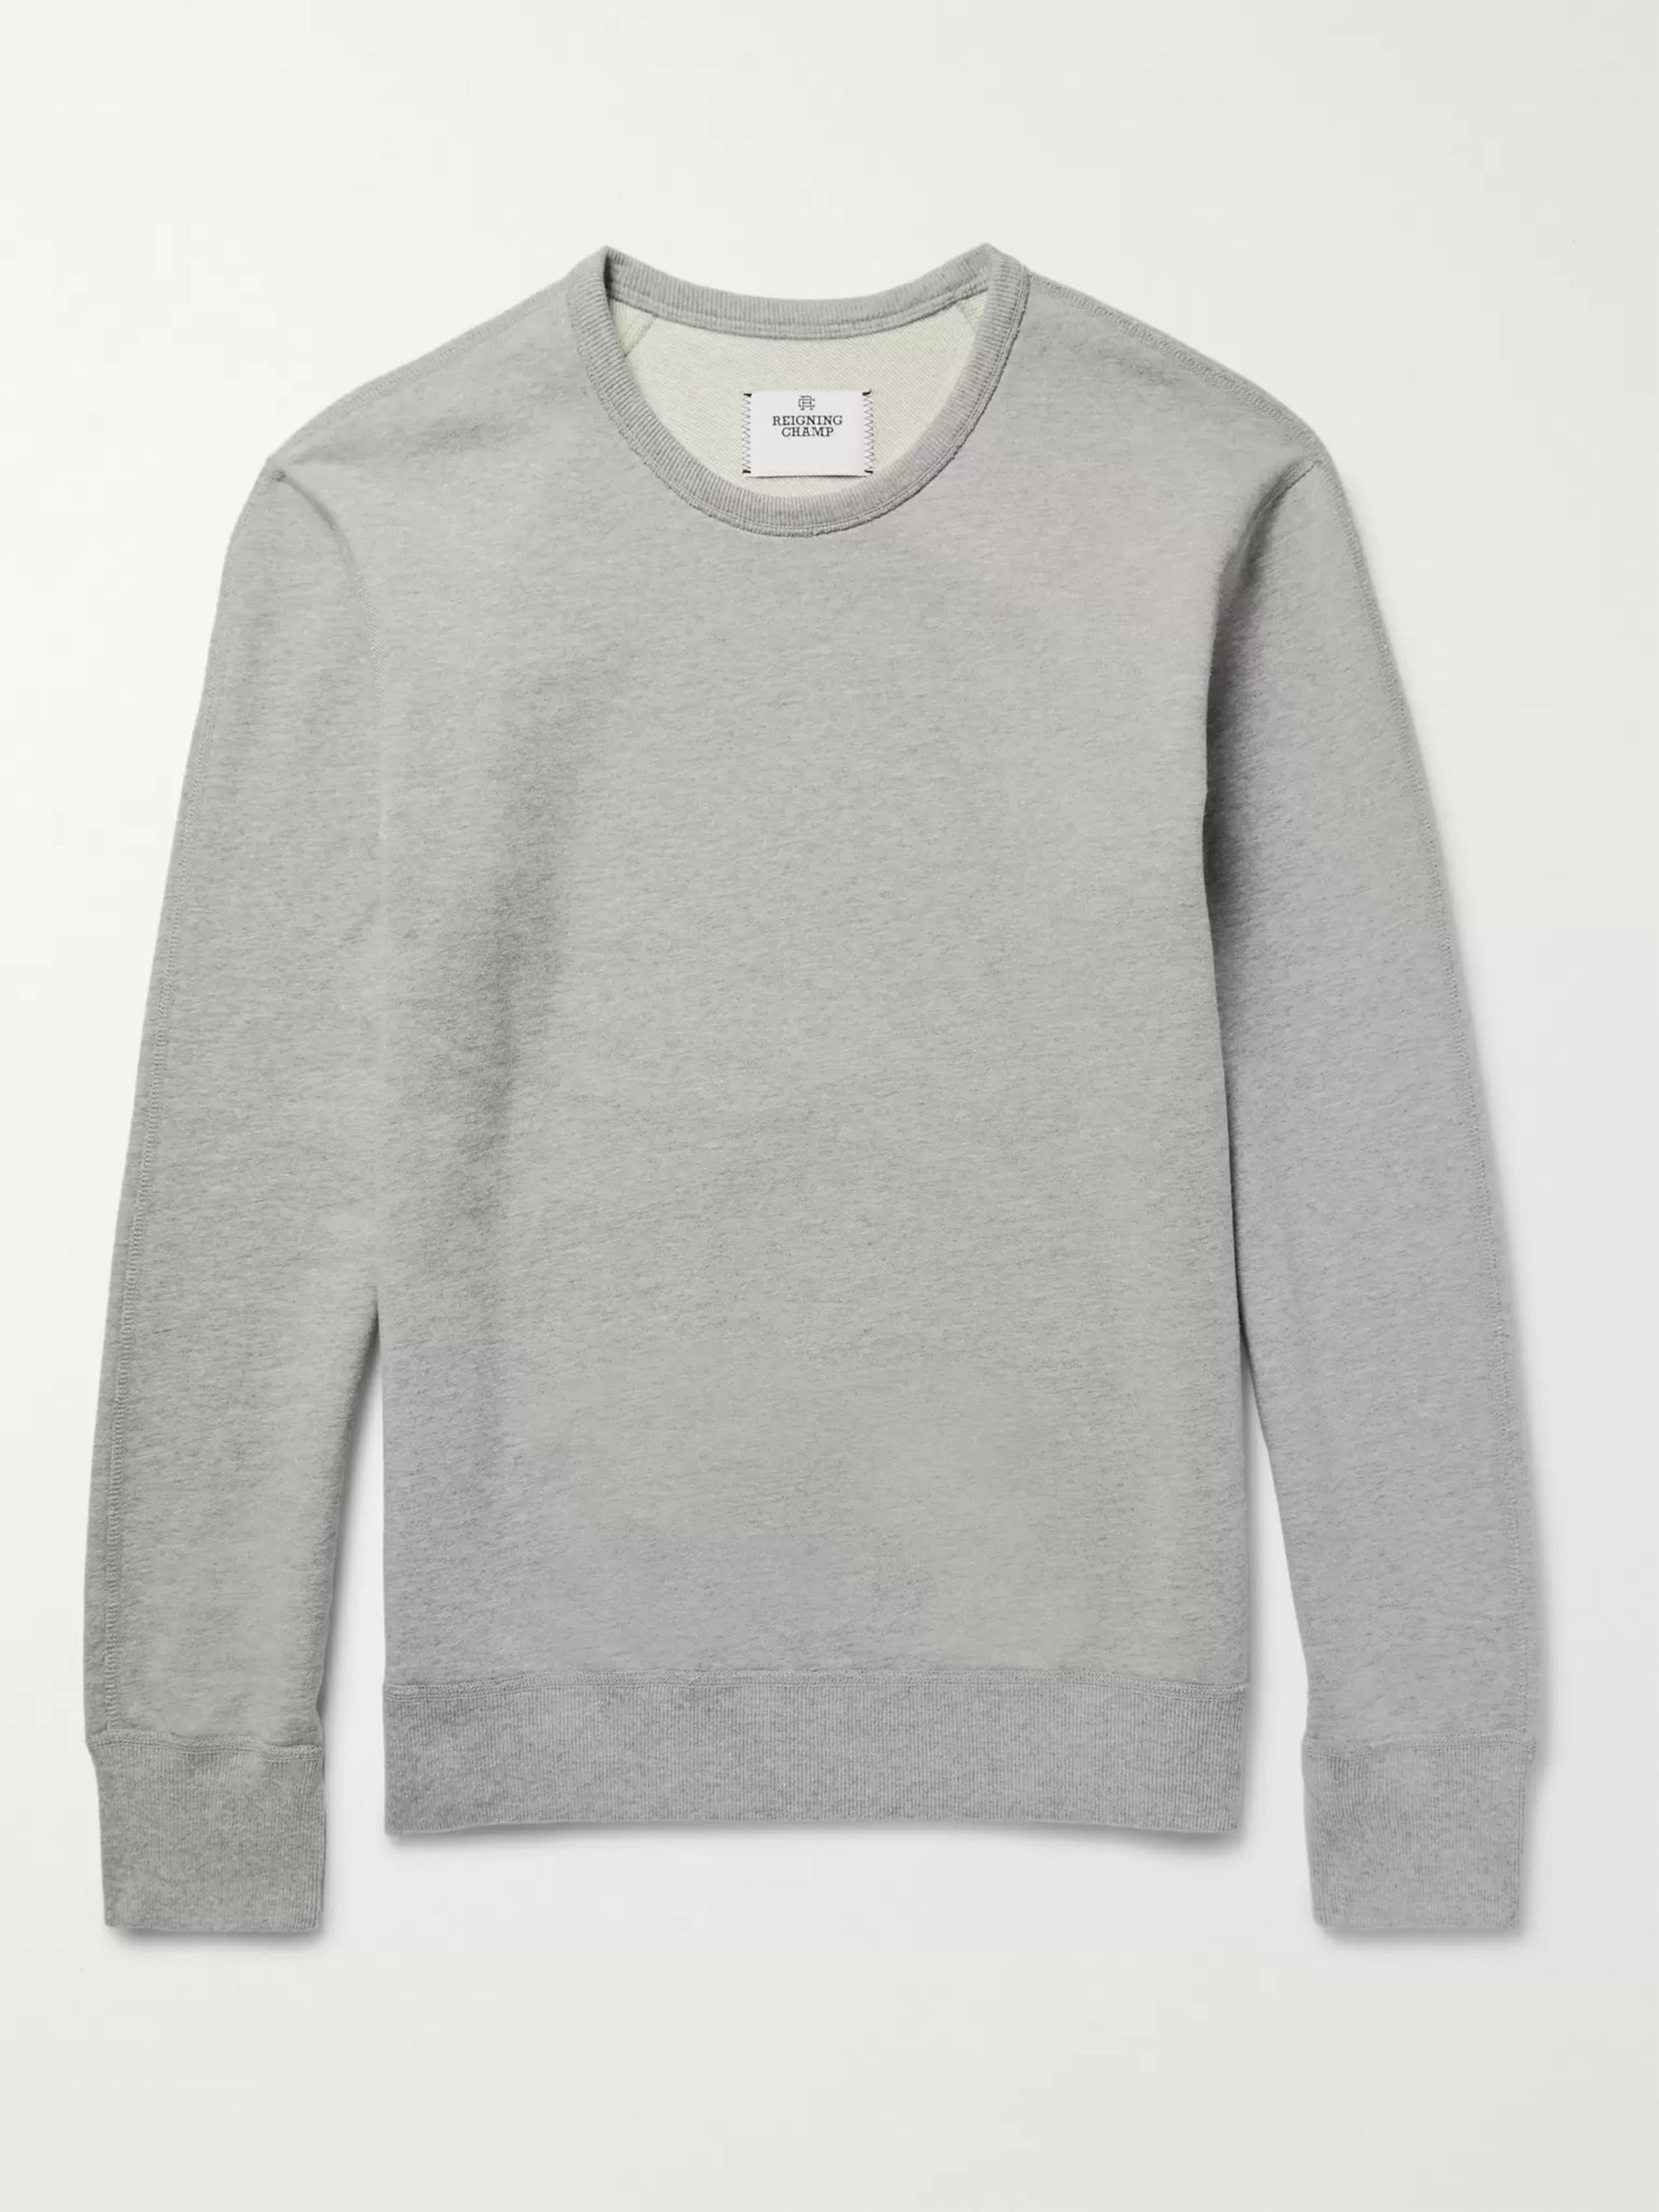 reigning champ clothing